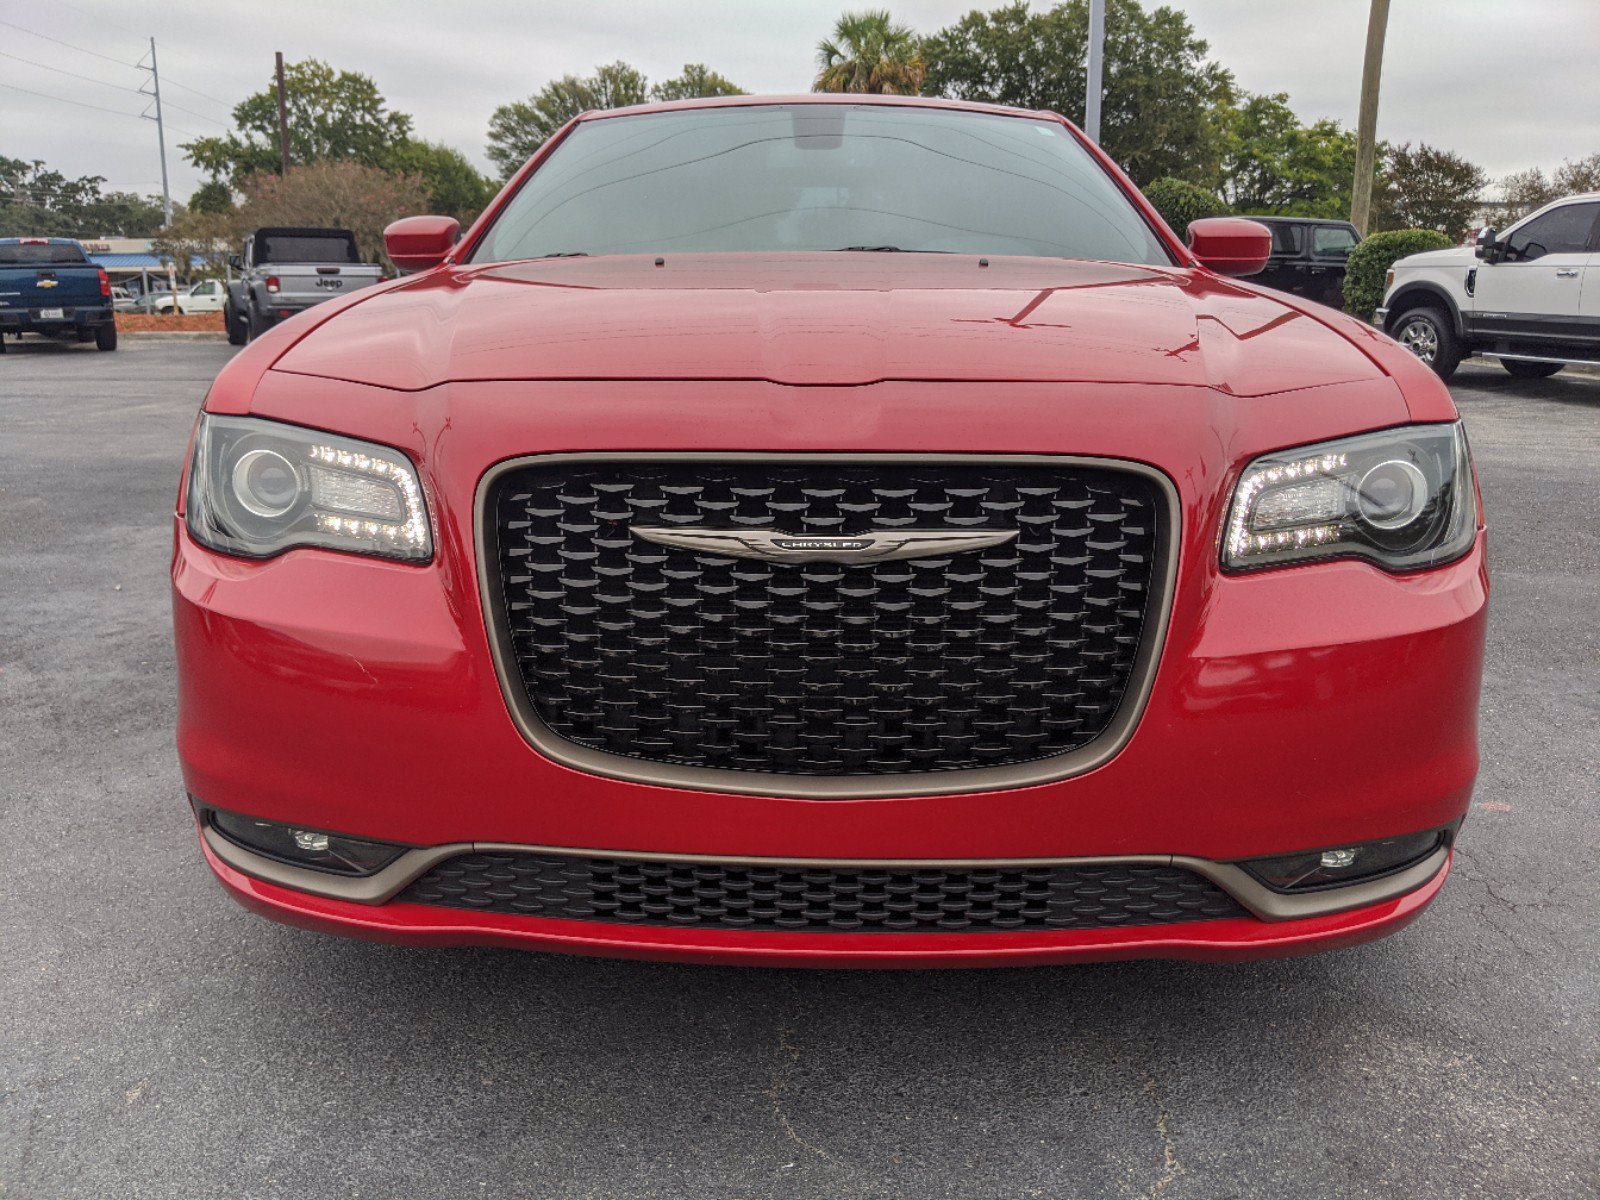 Certified PreOwned 2017 Chrysler 300 300S Alloy Edition